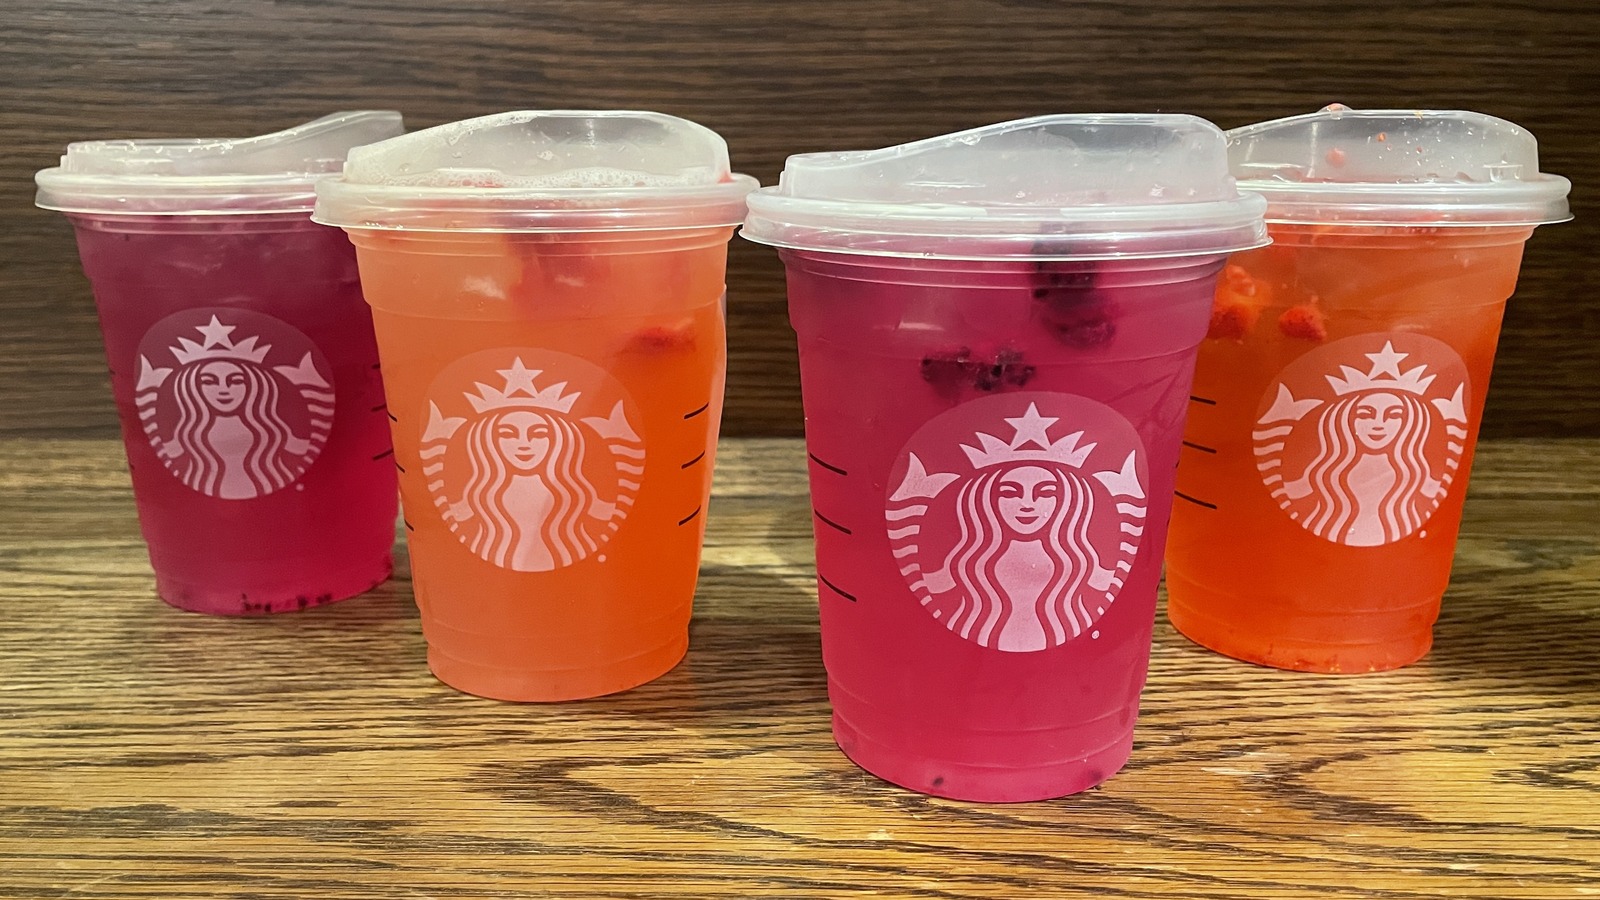 The Starbucks Red Drink